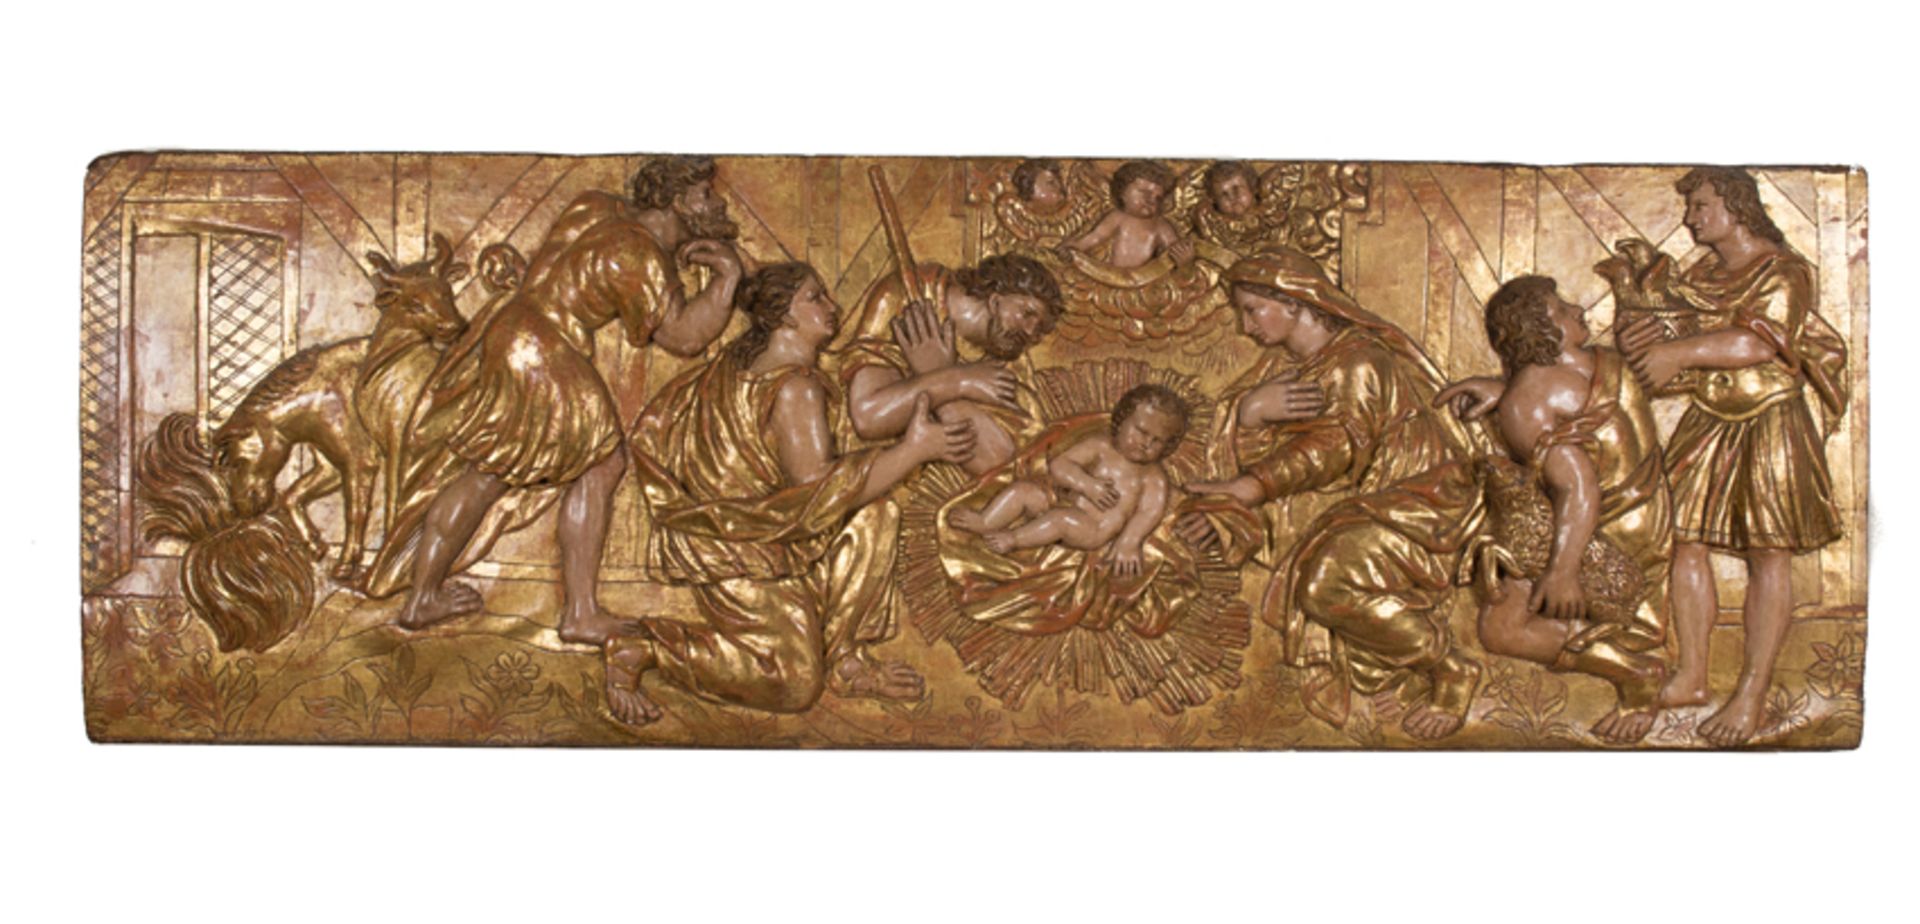 "The adoration of the shepherds". Carved and polychromed wooden relief. Italian School. 16th - 17th